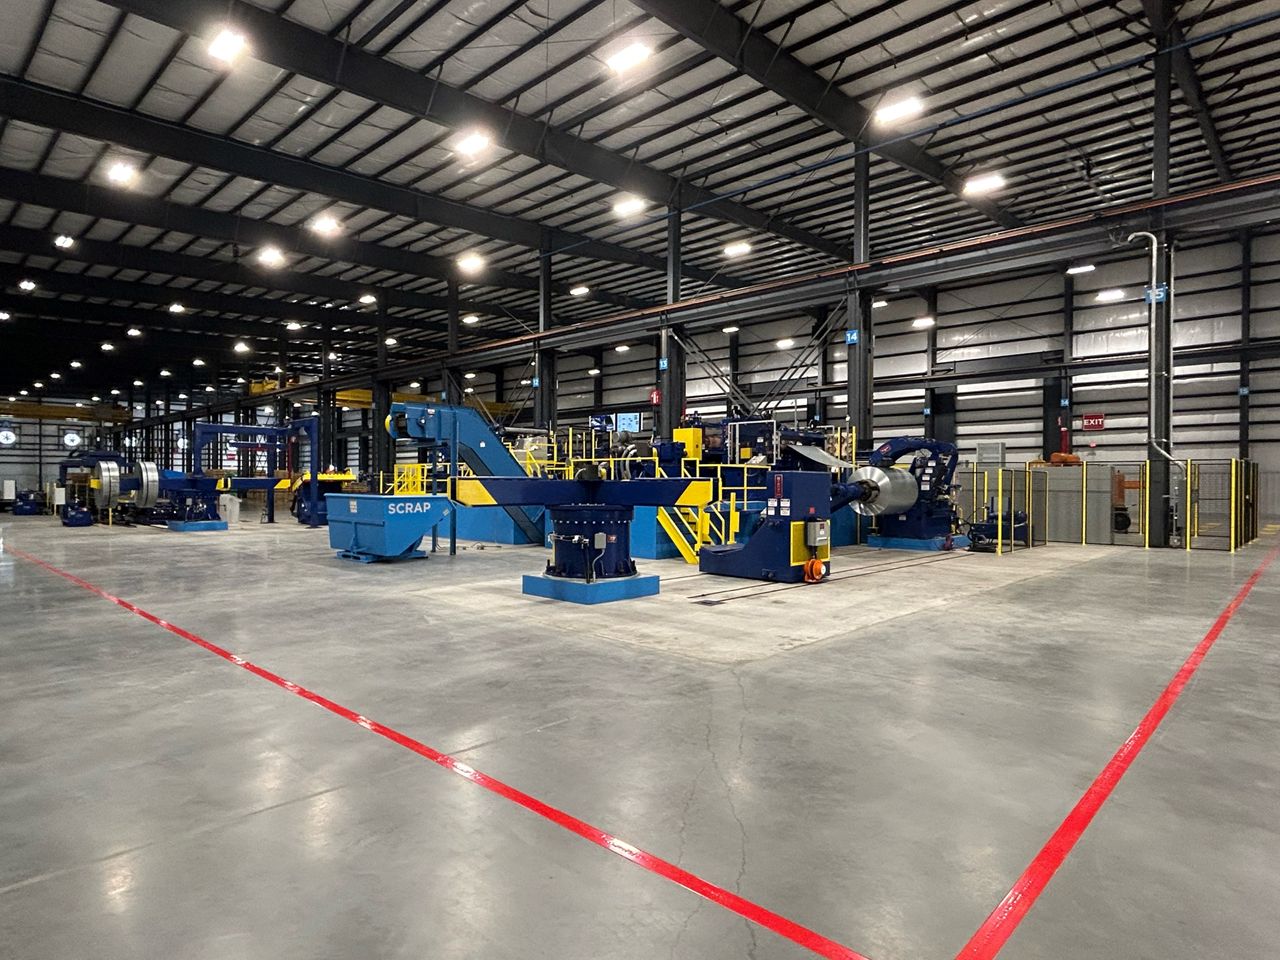 New service center by thyssenkrupp Materials NA in Sinton, Texas